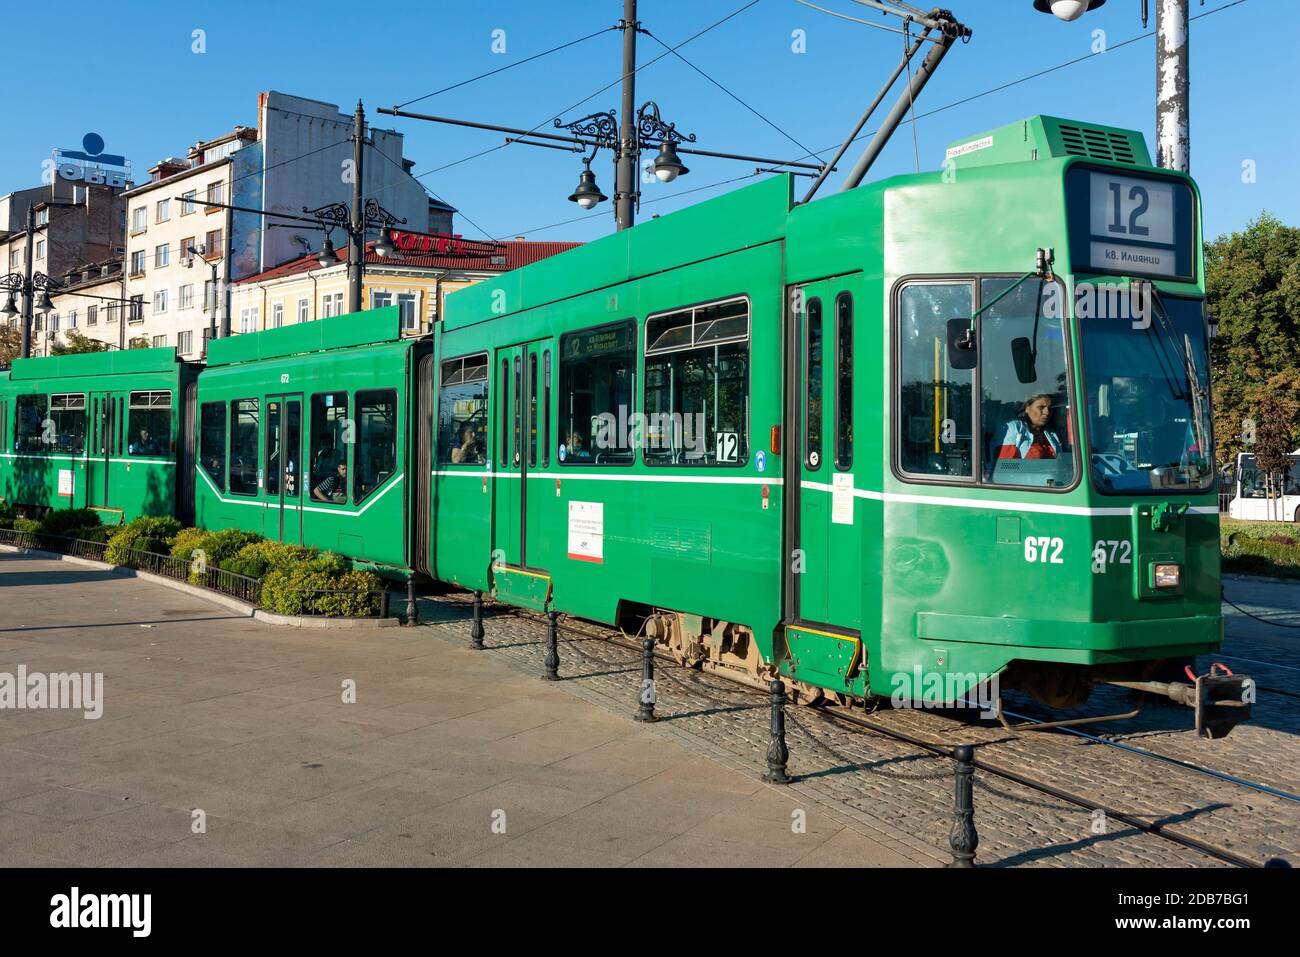 Single Be 4/6 S Schindler/Siemens or Schindler Waggon AG Be 4/6 green tram or Green Cucumber in downtown Sofia Bulgaria Stock Photo